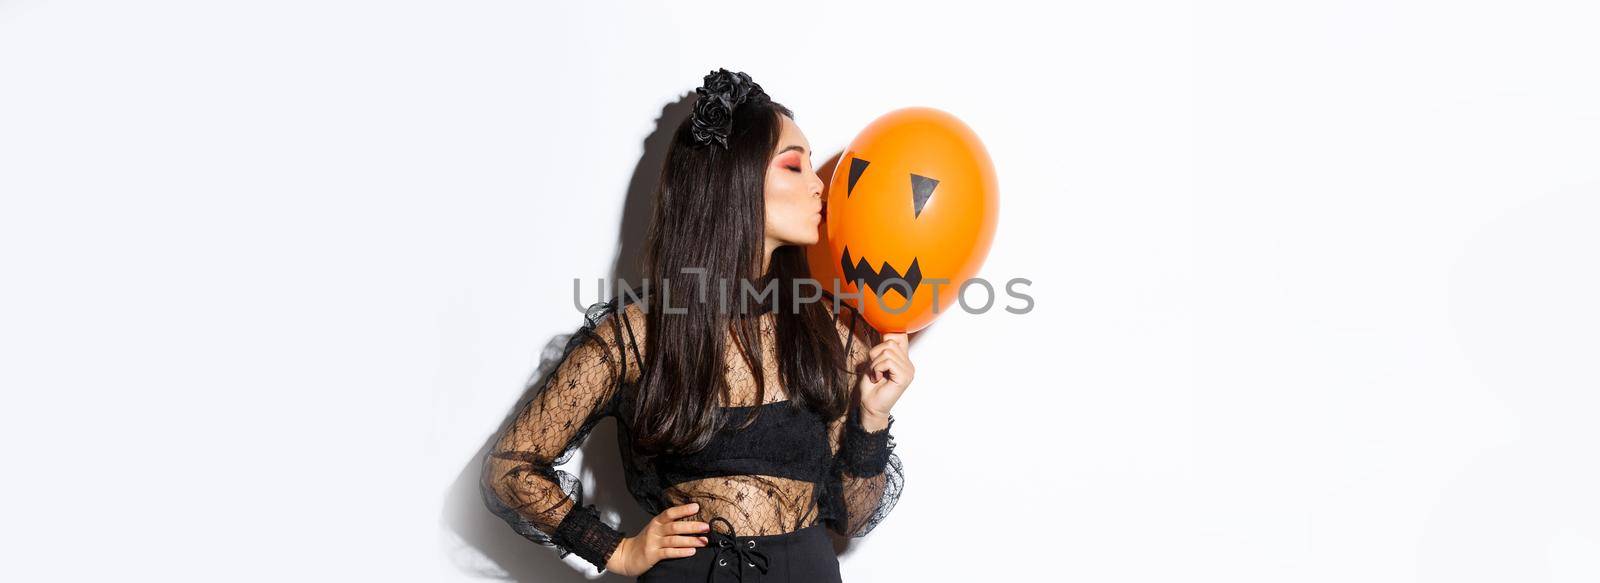 Stylish asian woman in gothic lace dress celebrating halloween, kissing orange balloon with face, standing over white background.